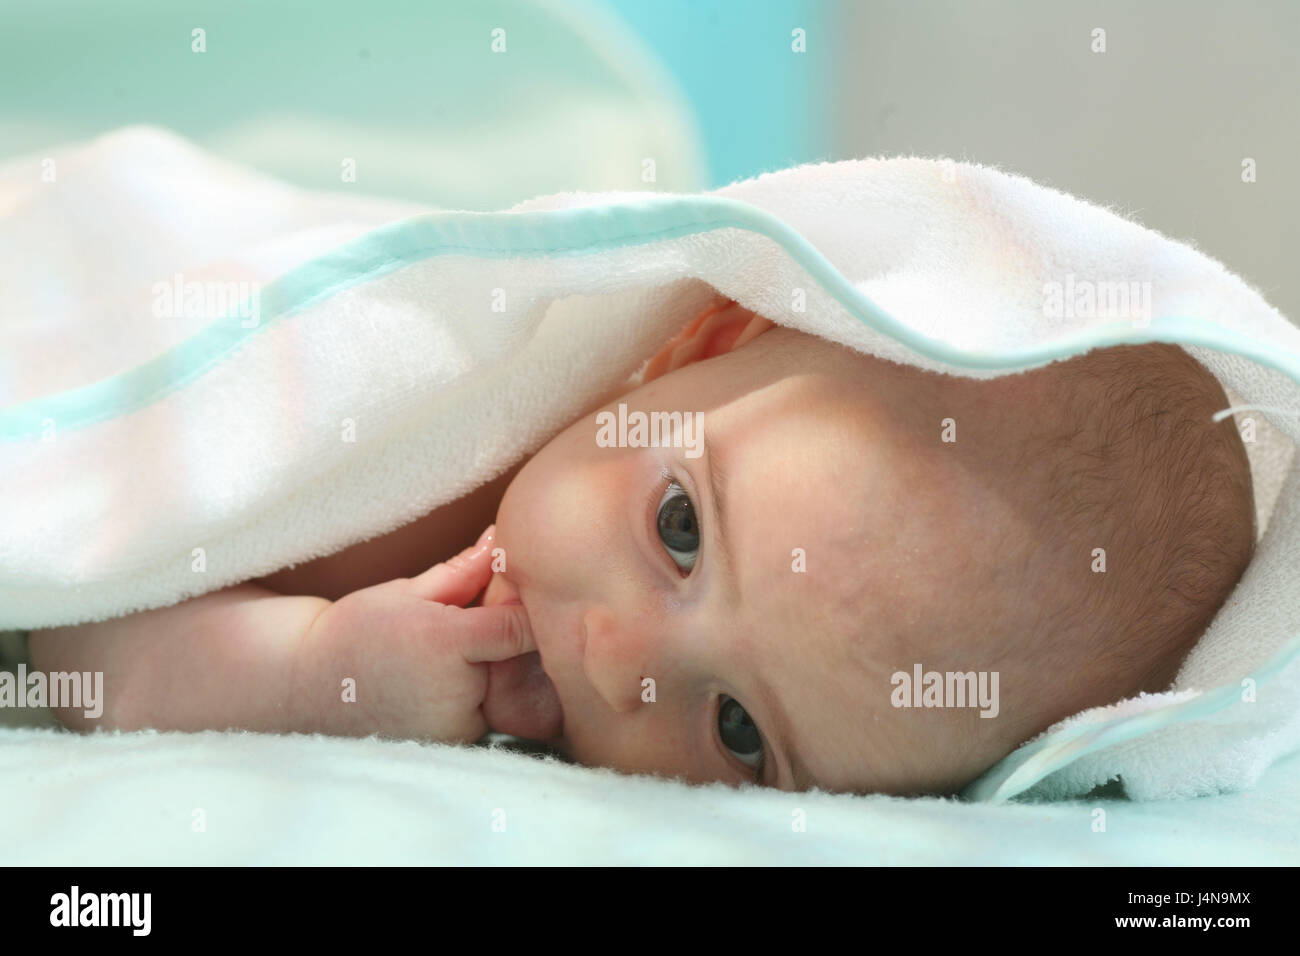 Baby, 3 months, fingers, mouth, thoughtfully, awake, Stock Photo